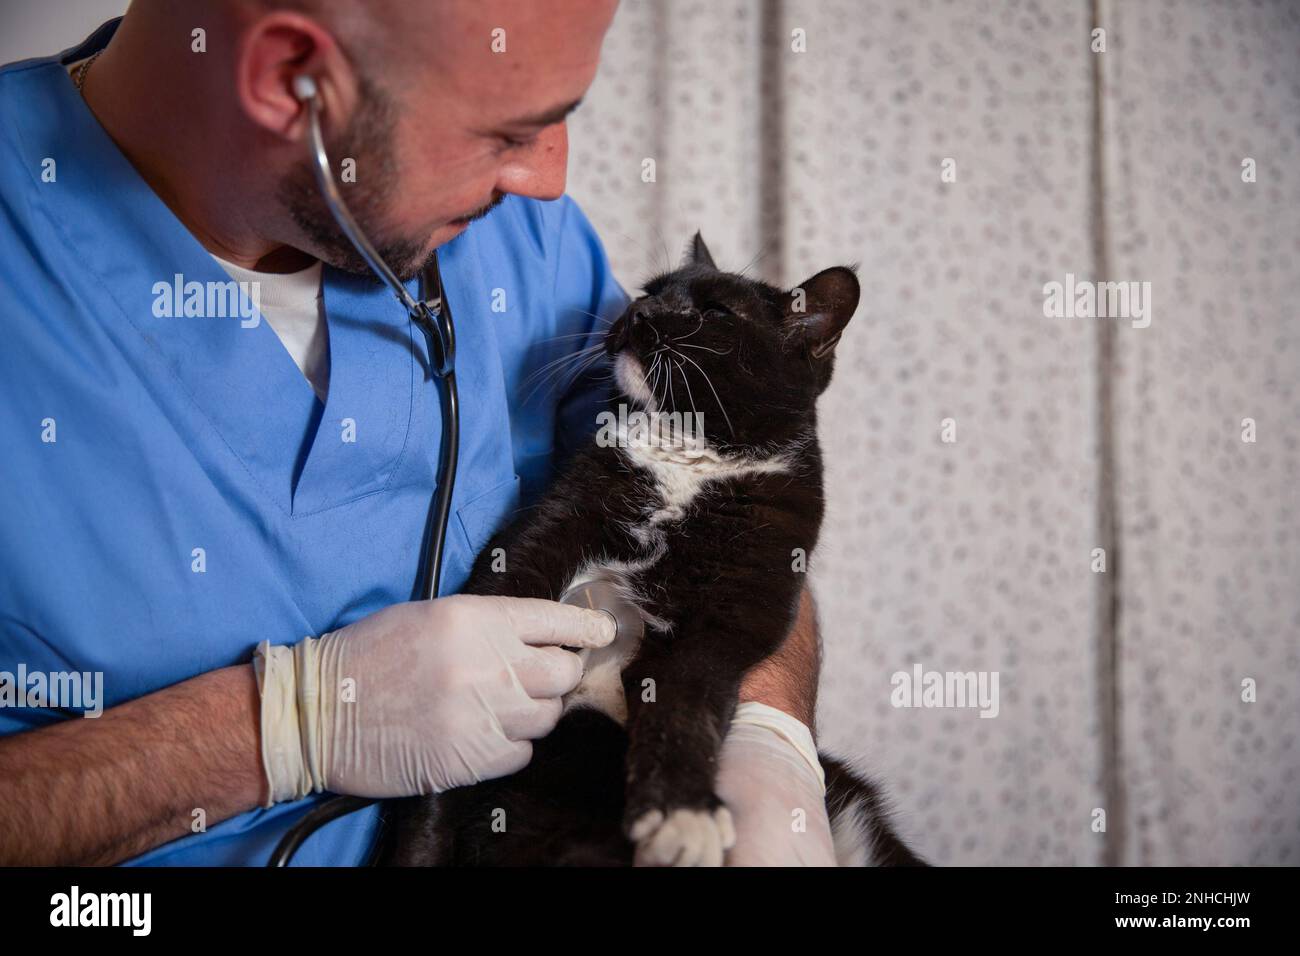 A vet holds a cat in his hand and examines it with a stethoscope. Stock Photo